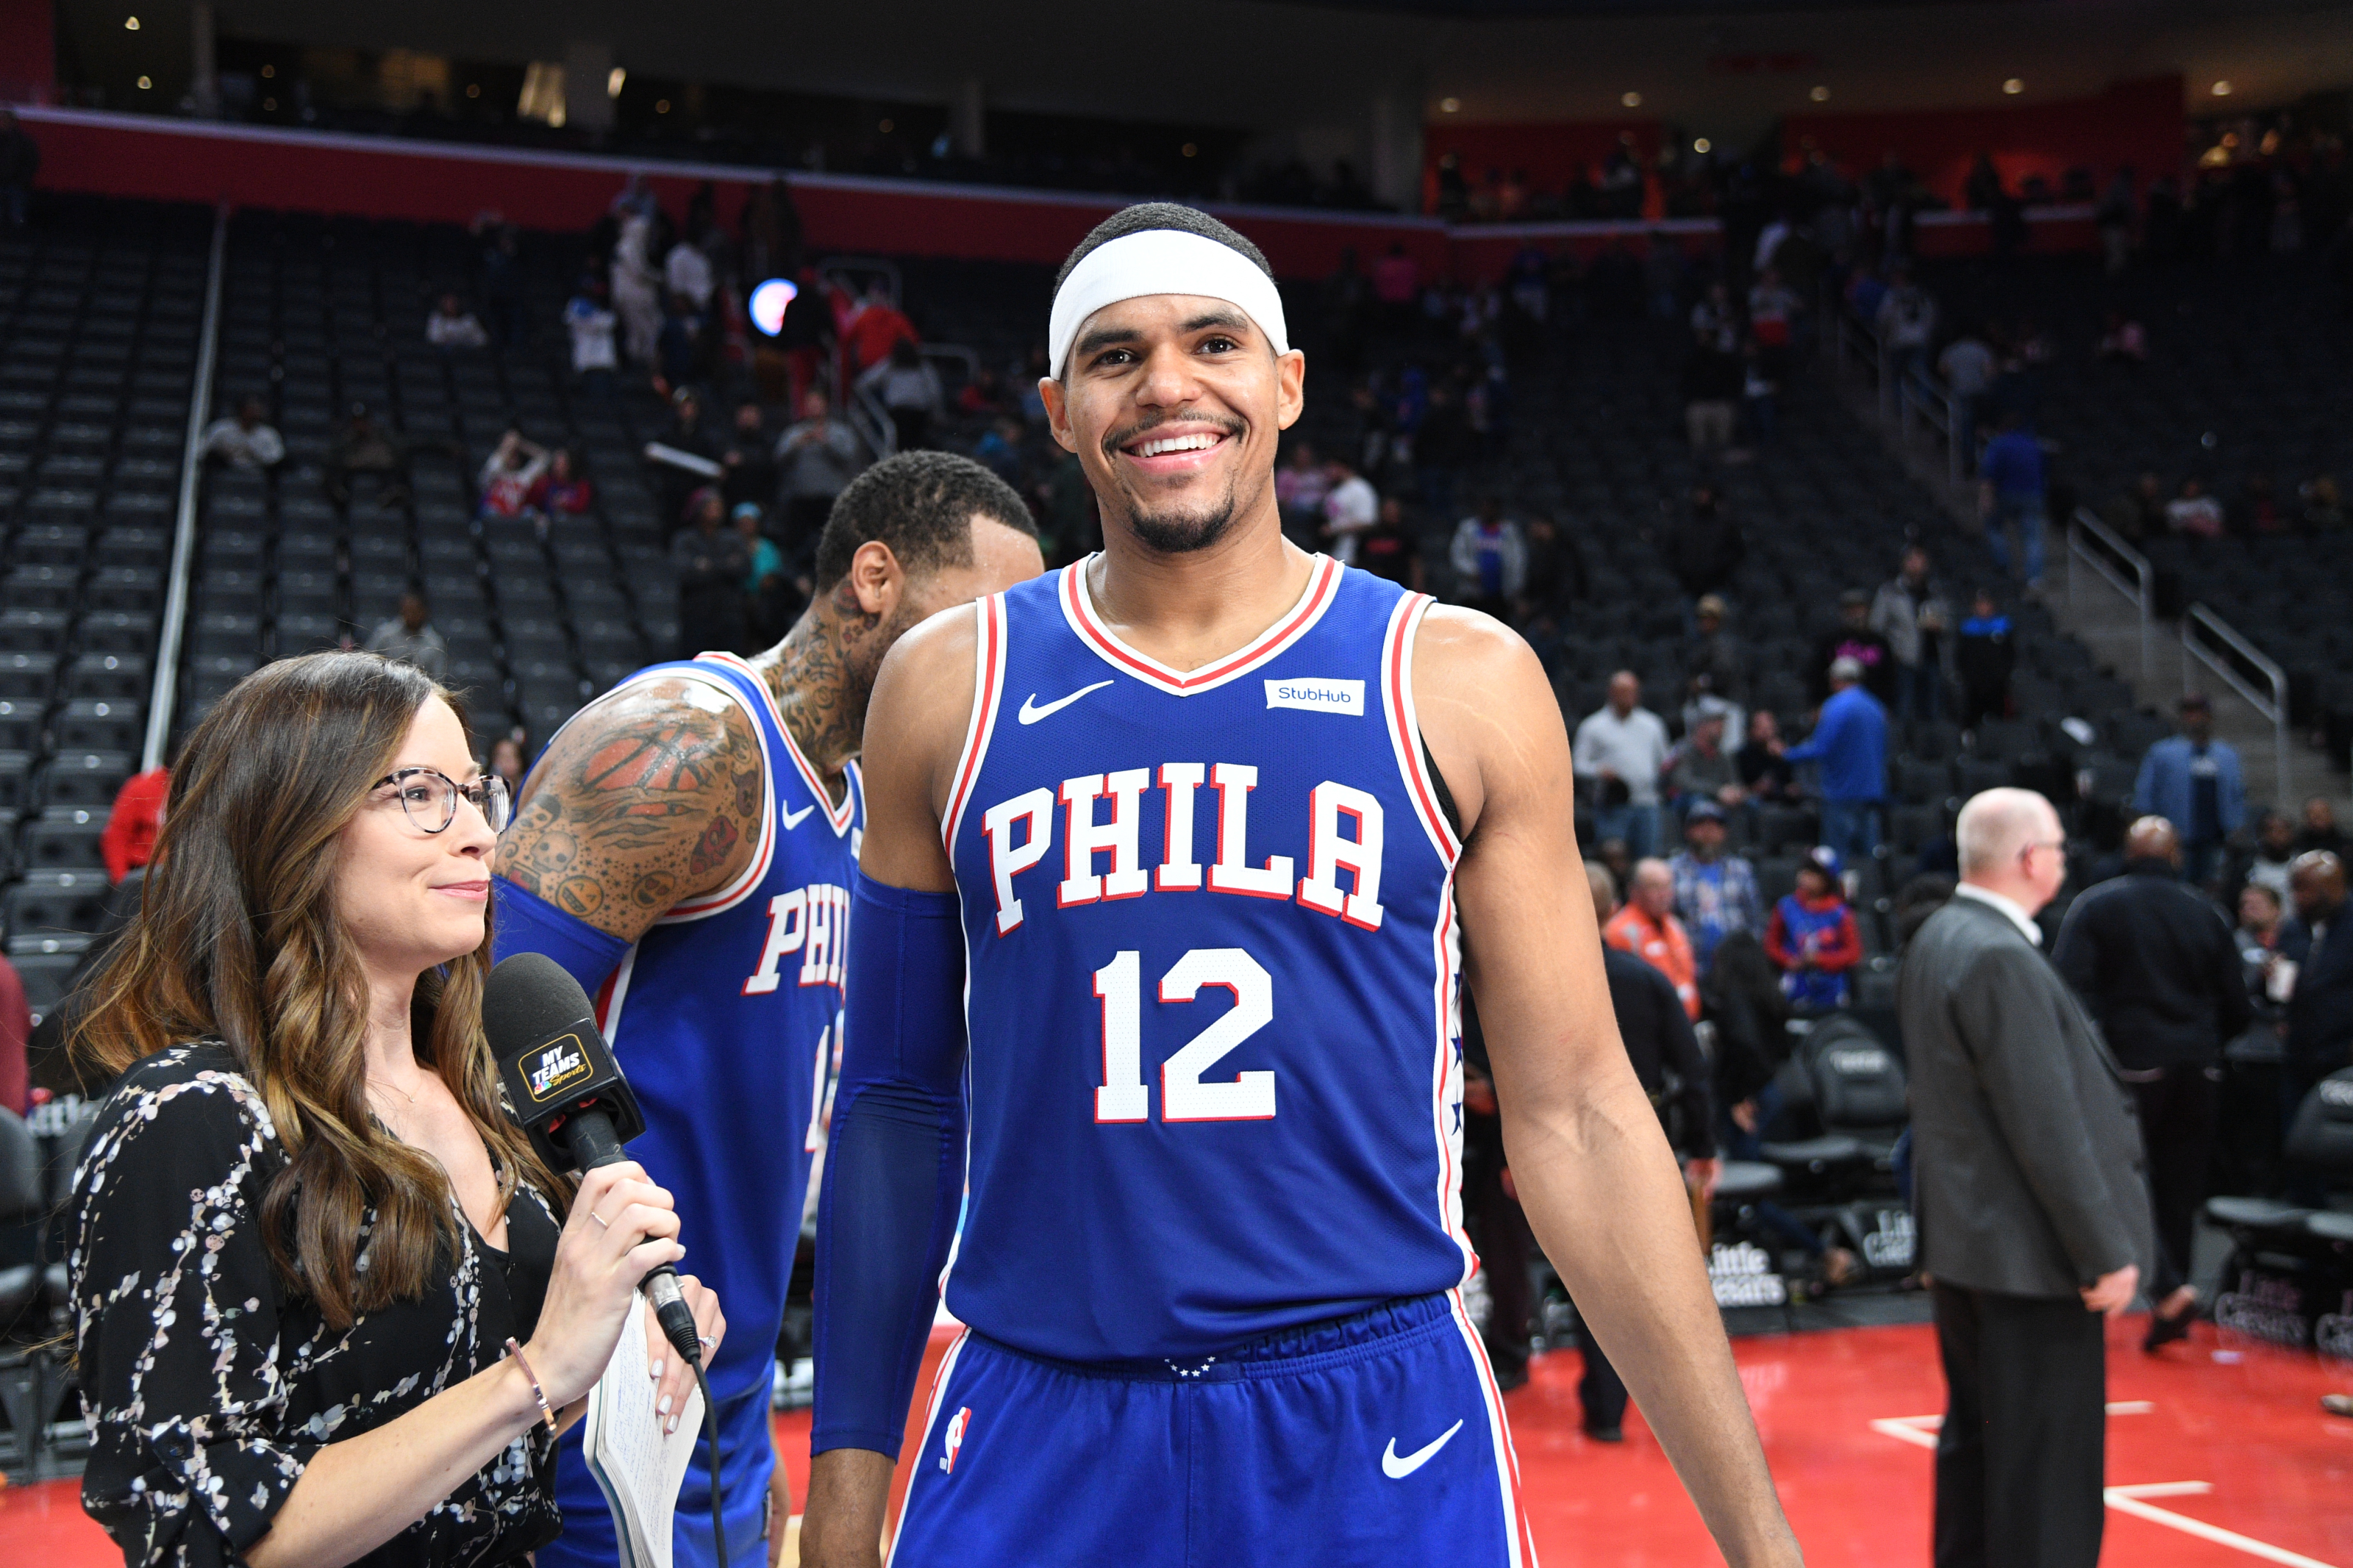 With proper protocols in place, 76ers' Tobias Harris ready to